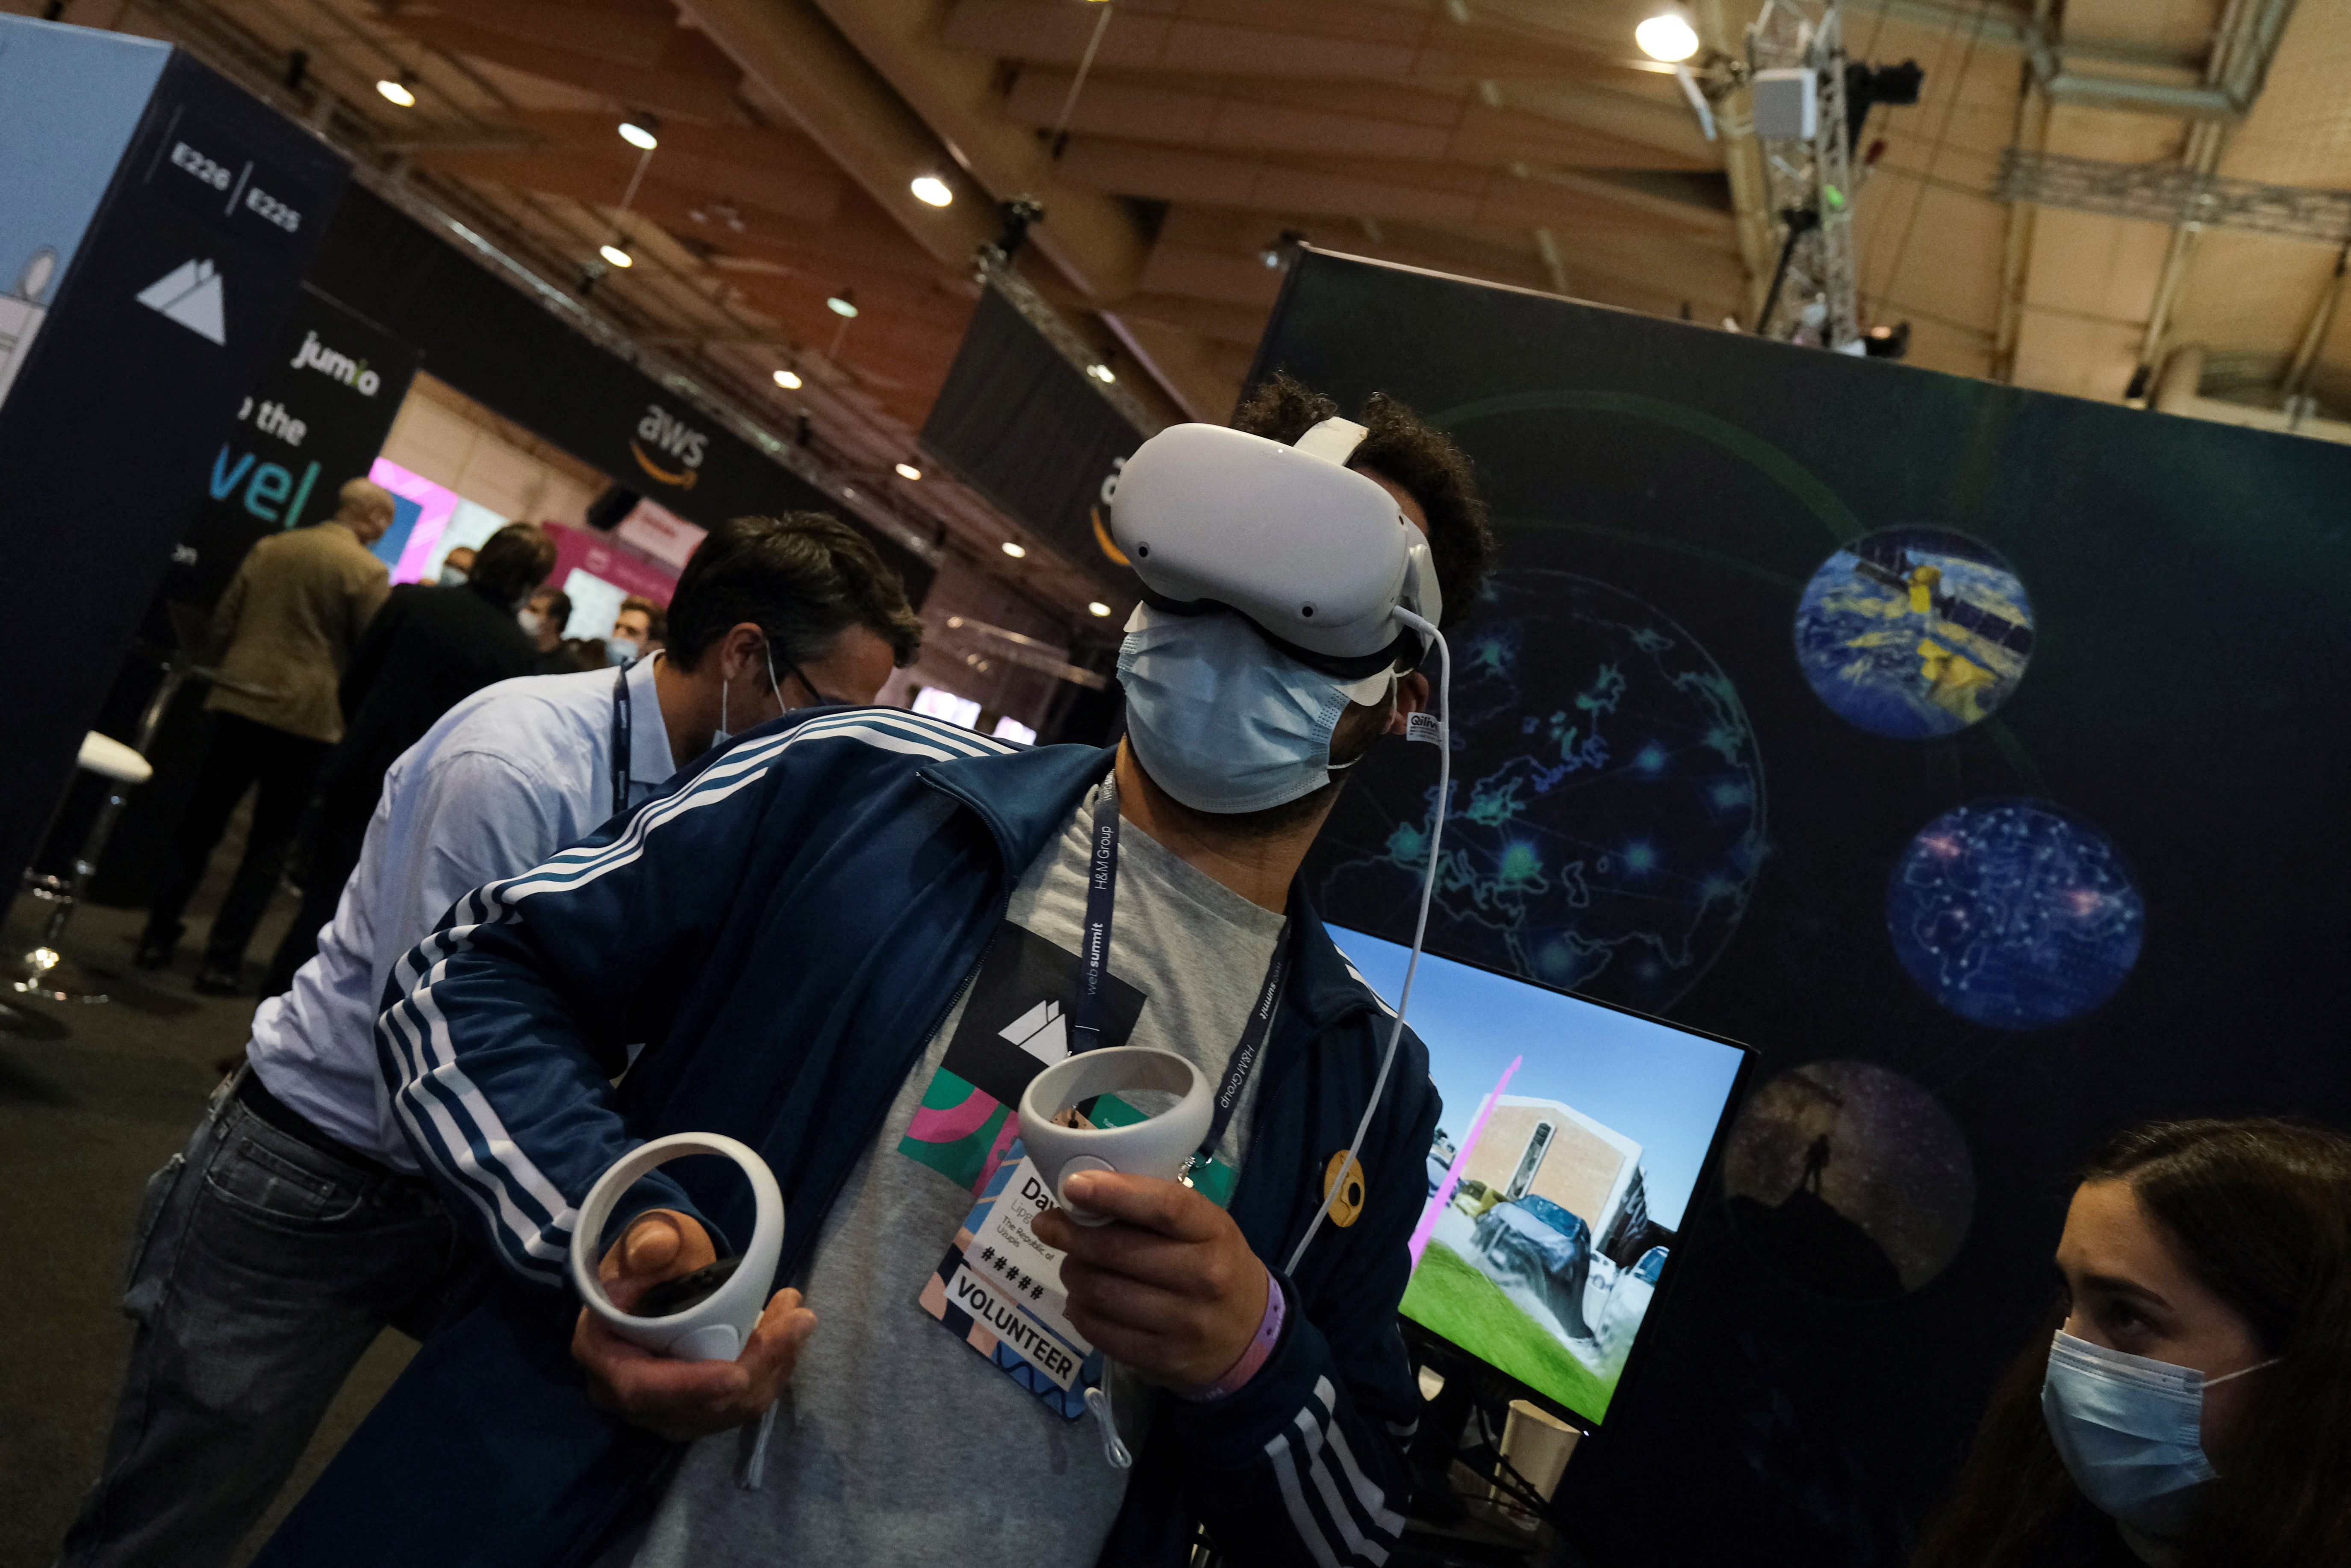 A person wears virtual reality goggles at the European Space Agency (ESA) stand in the Web Summit, in Lisbon